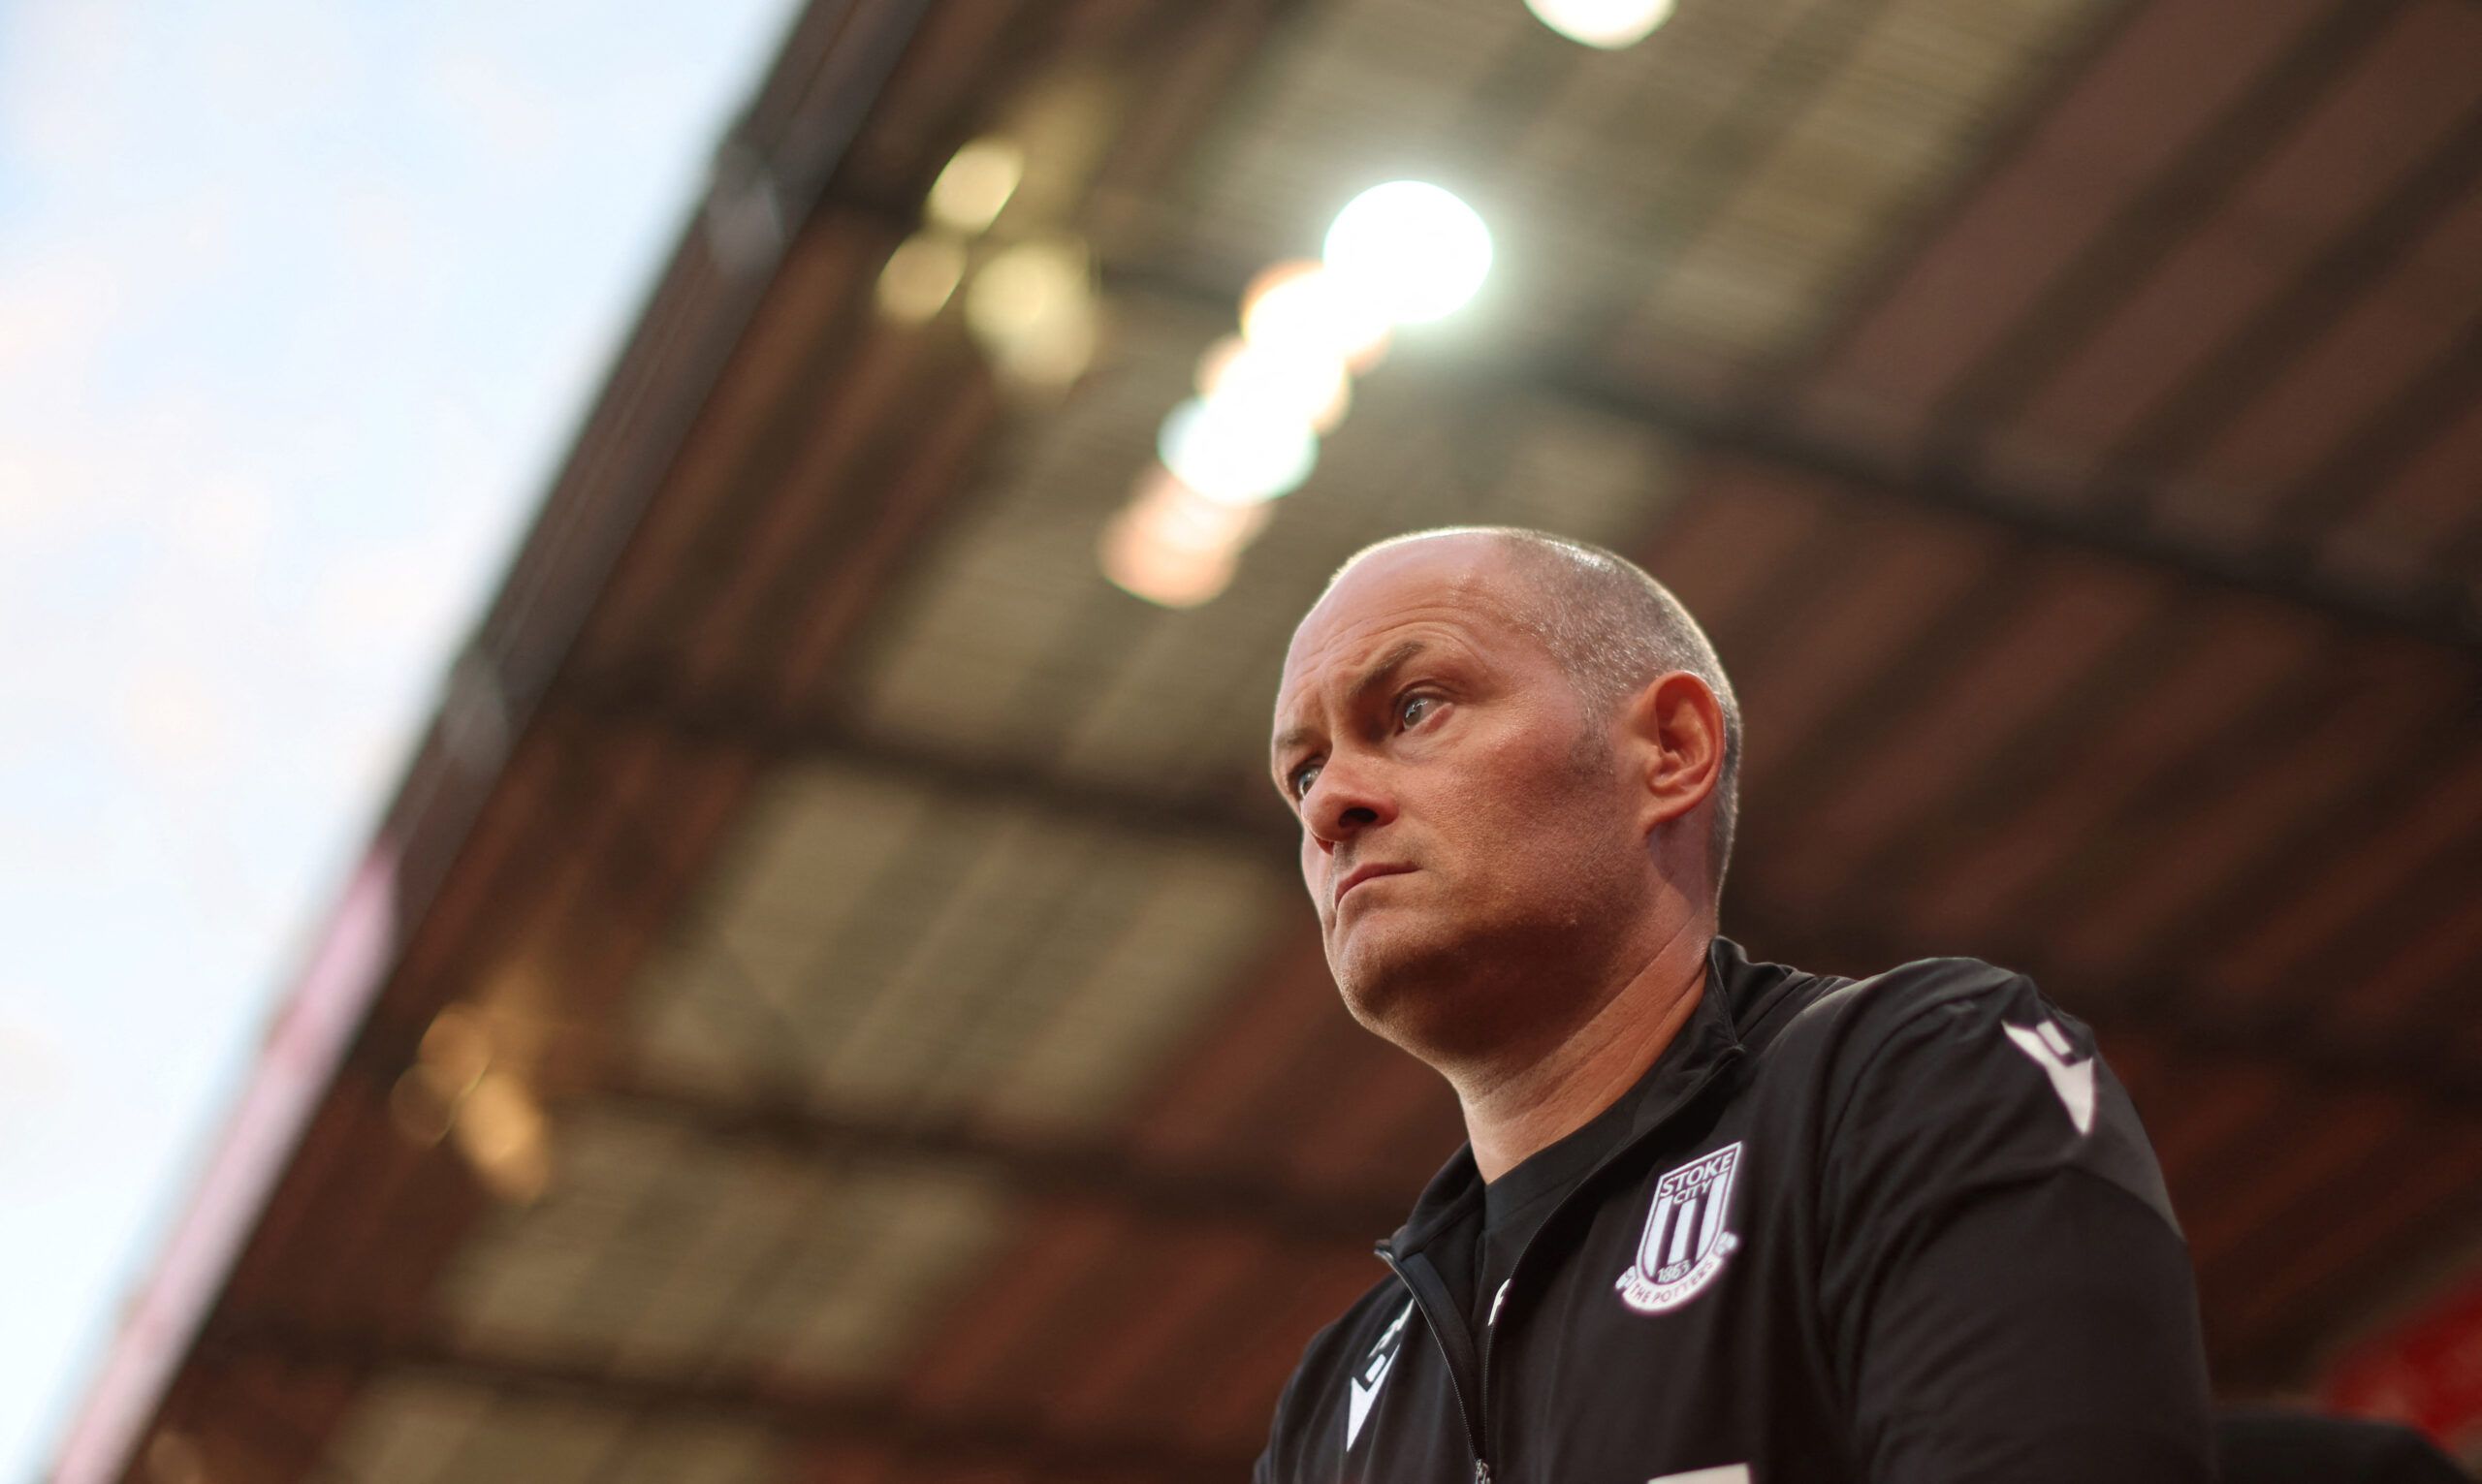 Soccer Football - Championship - Stoke City v Swansea City - bet365 Stadium, Stoke-on-Trent, Britain - August 31, 2022 Stoke City manager Alex Neil reacts  Action Images/Carl Recine  EDITORIAL USE ONLY. No use with unauthorized audio, video, data, fixture lists, club/league logos or 